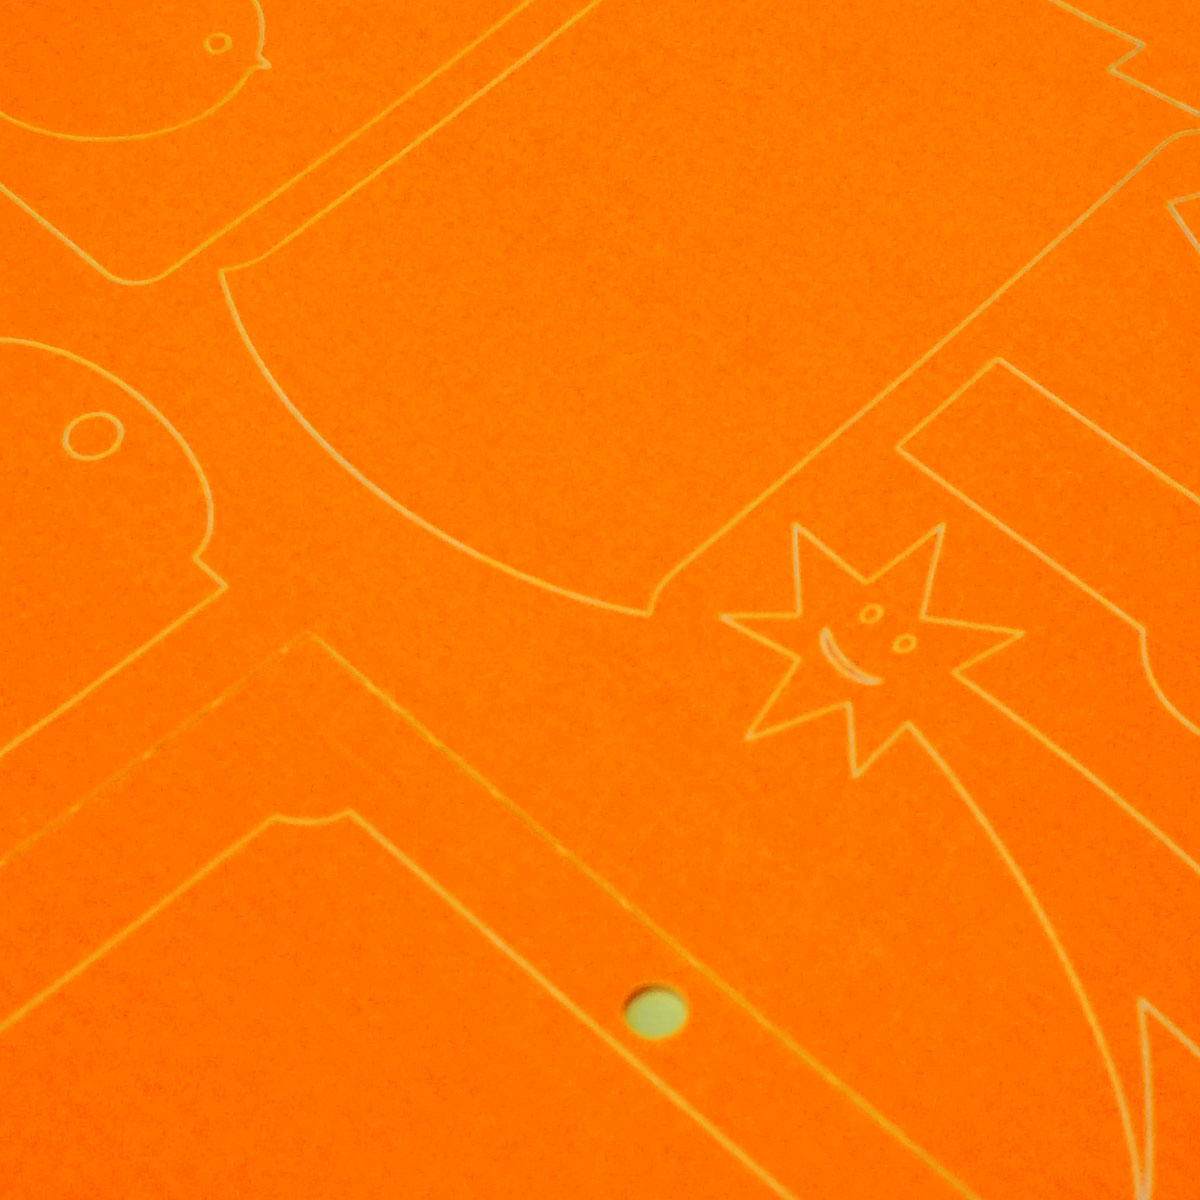 Self-adhesive fluorescent orange paper for laser printers and copiers